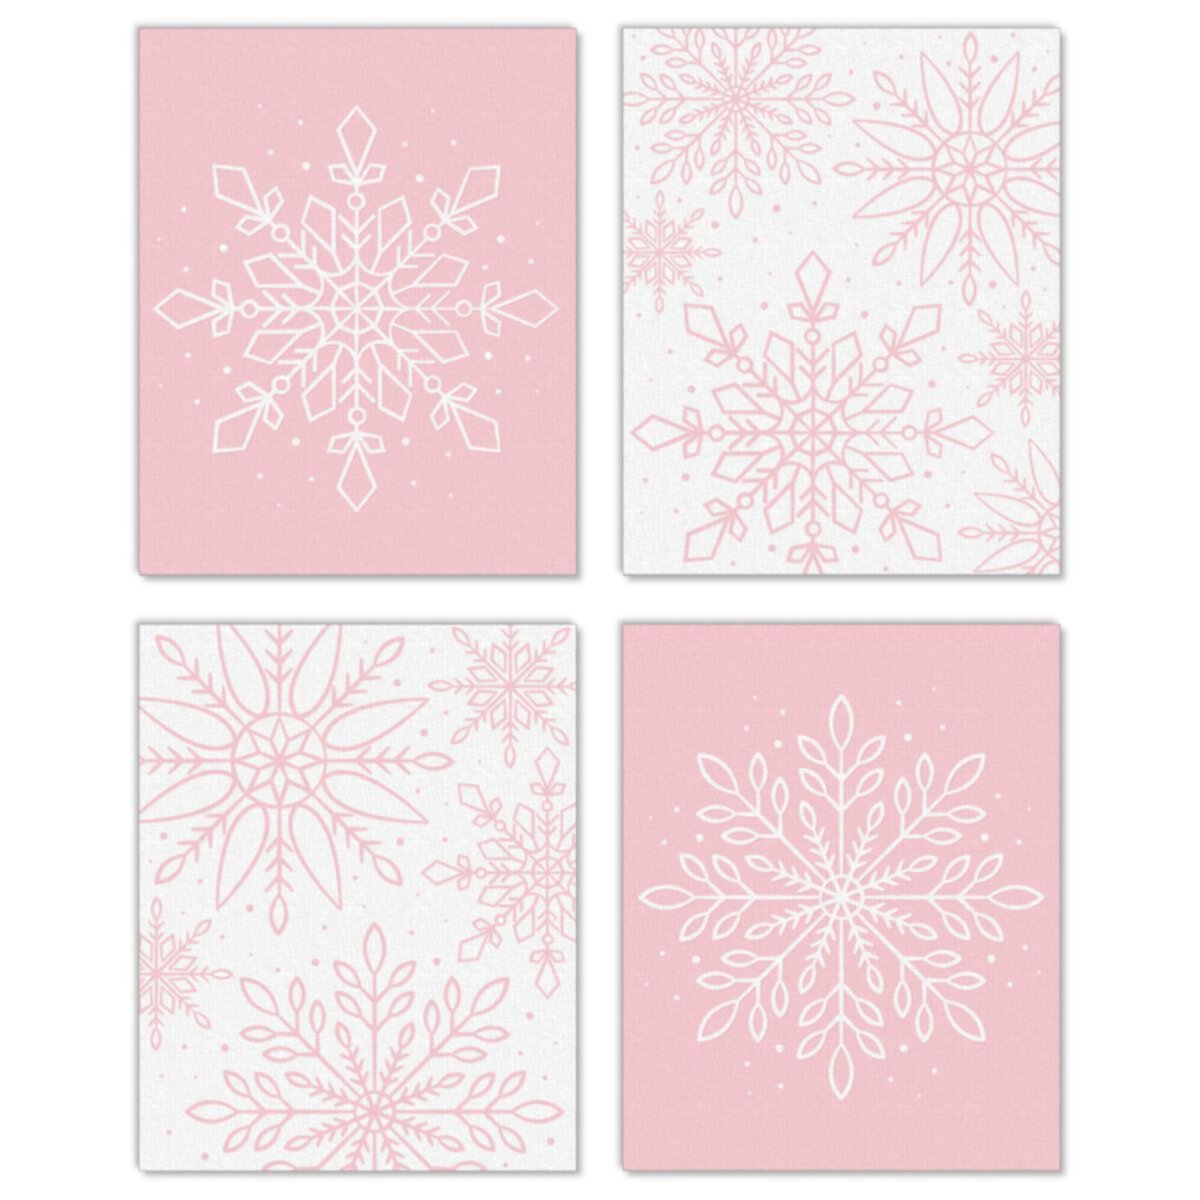 Big Dot of Happiness Pink Winter Wonderland - Unframed Holiday Snowflake Linen Paper Wall Art - Set of 4 - Artisms - 8 x 10 inches Big Dot of Happiness